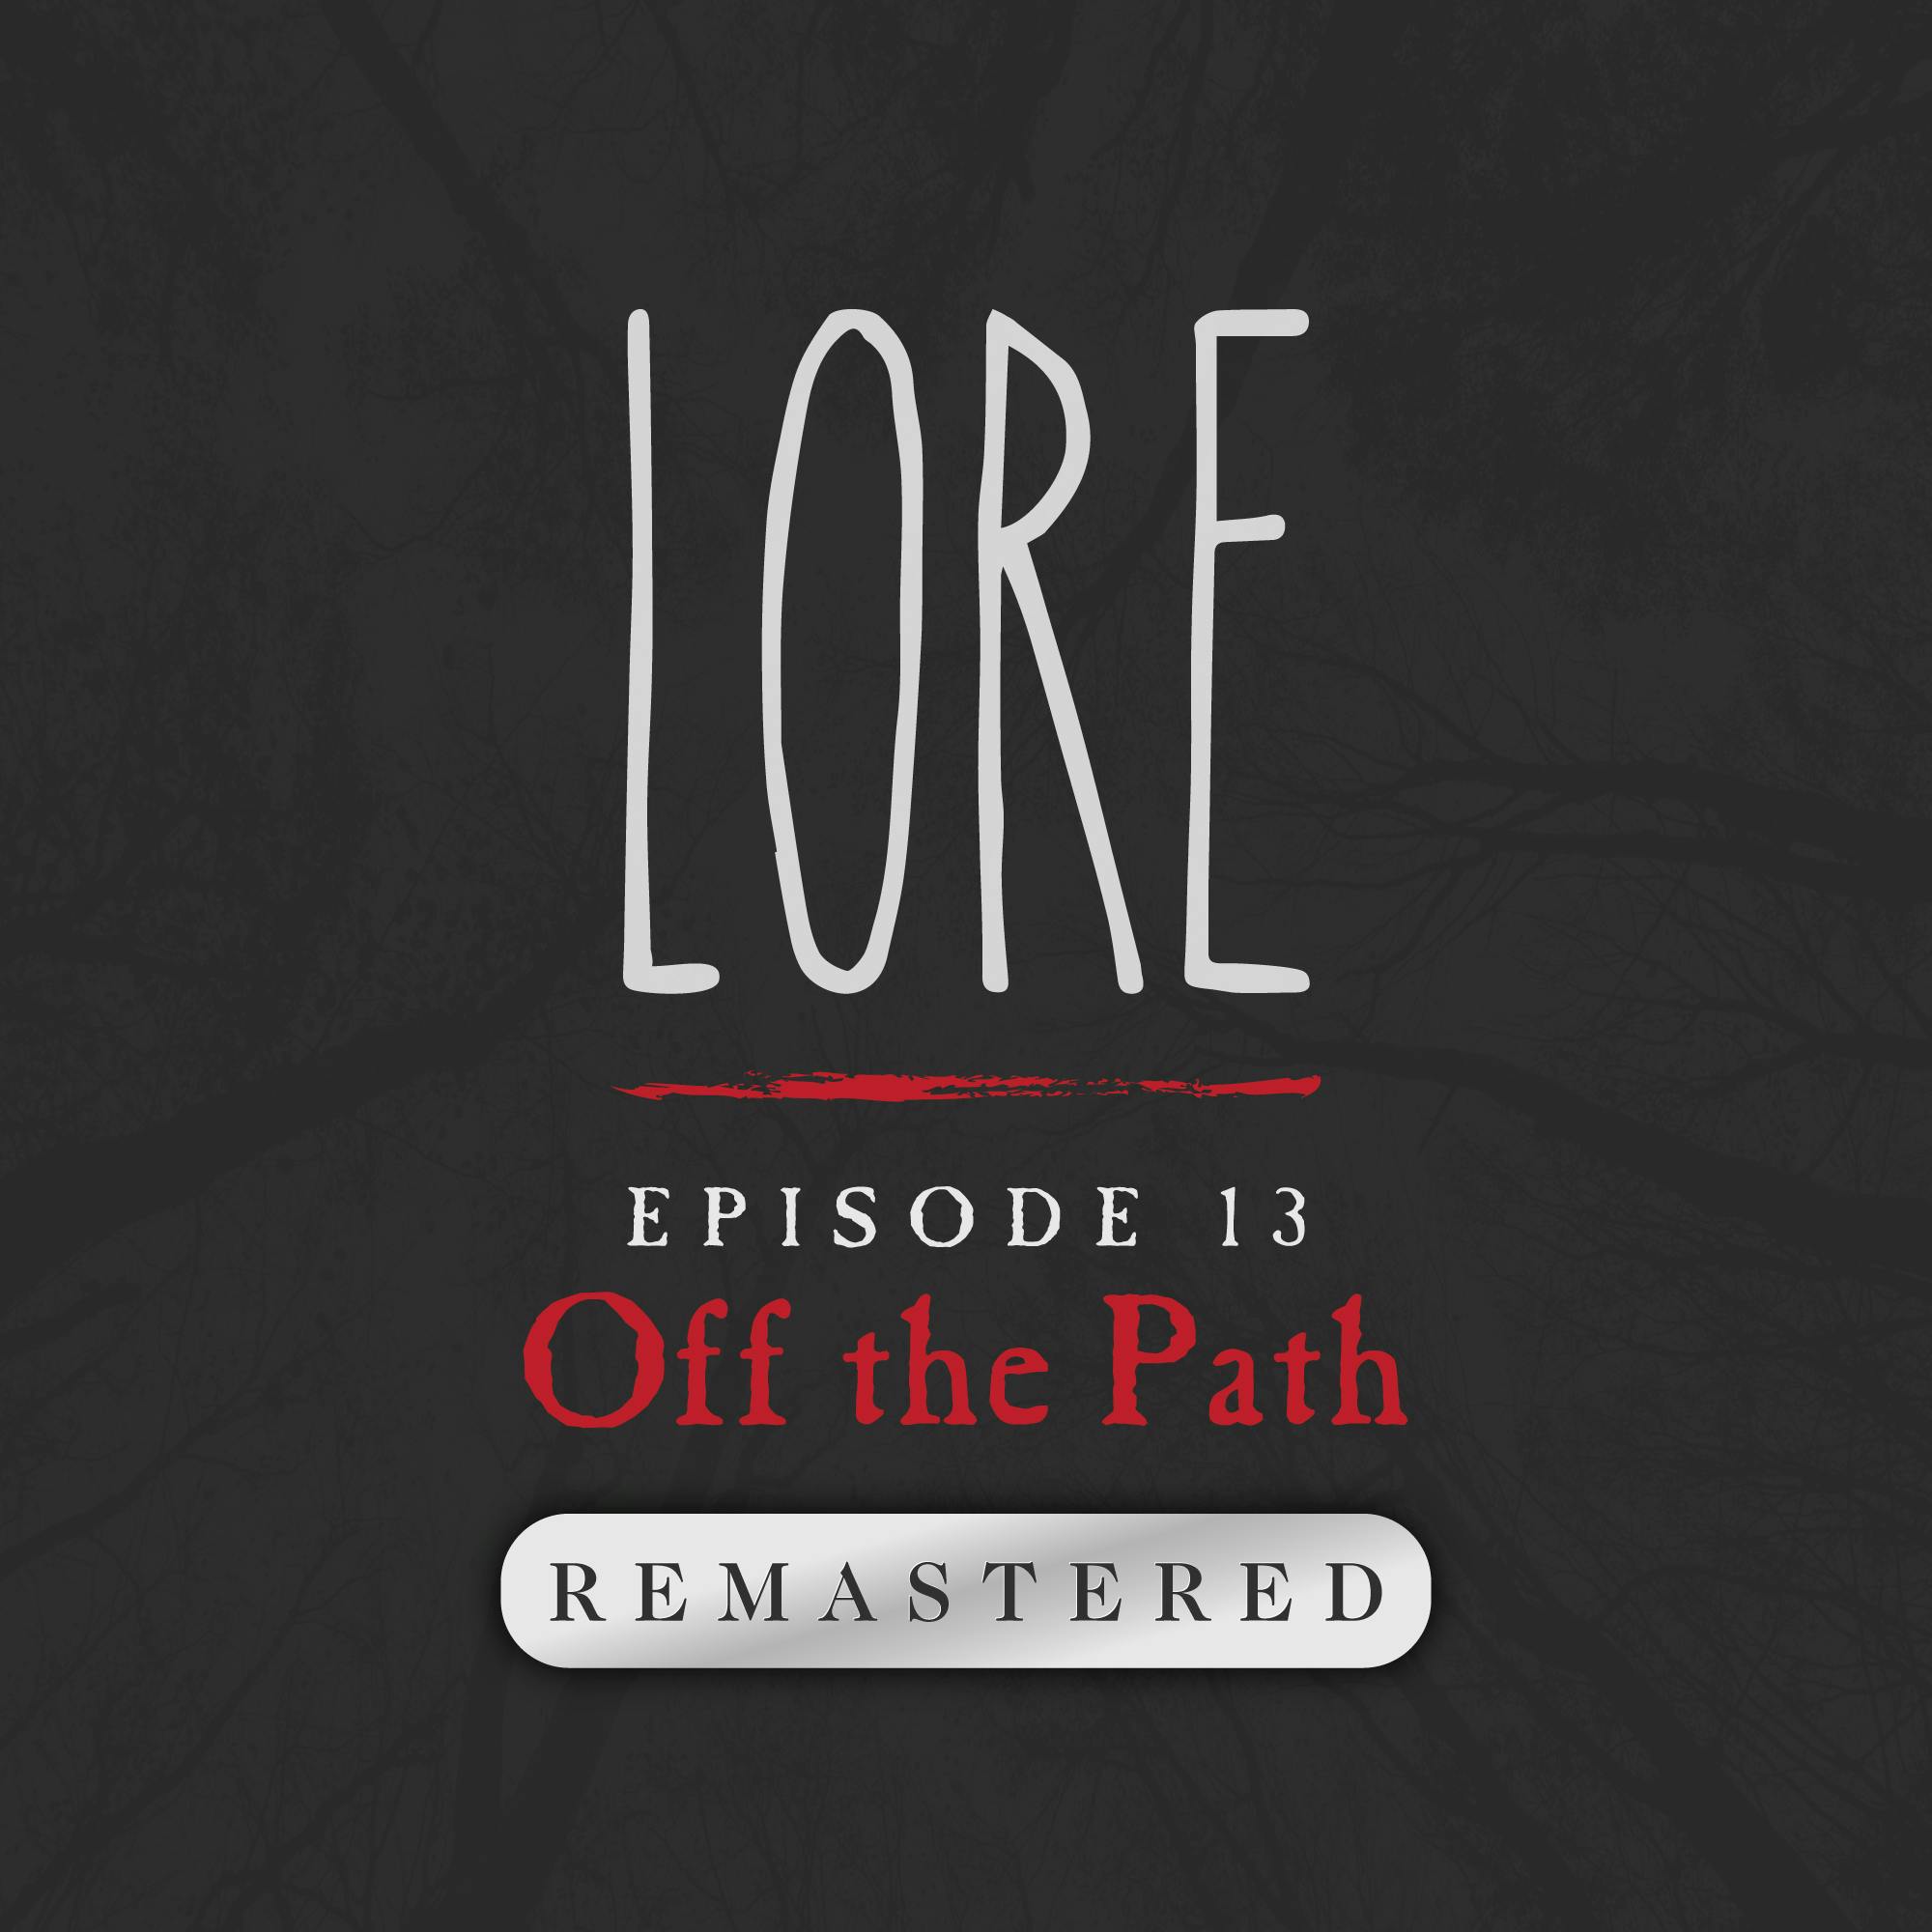 REMASTERED – Episode 13: Off the Path